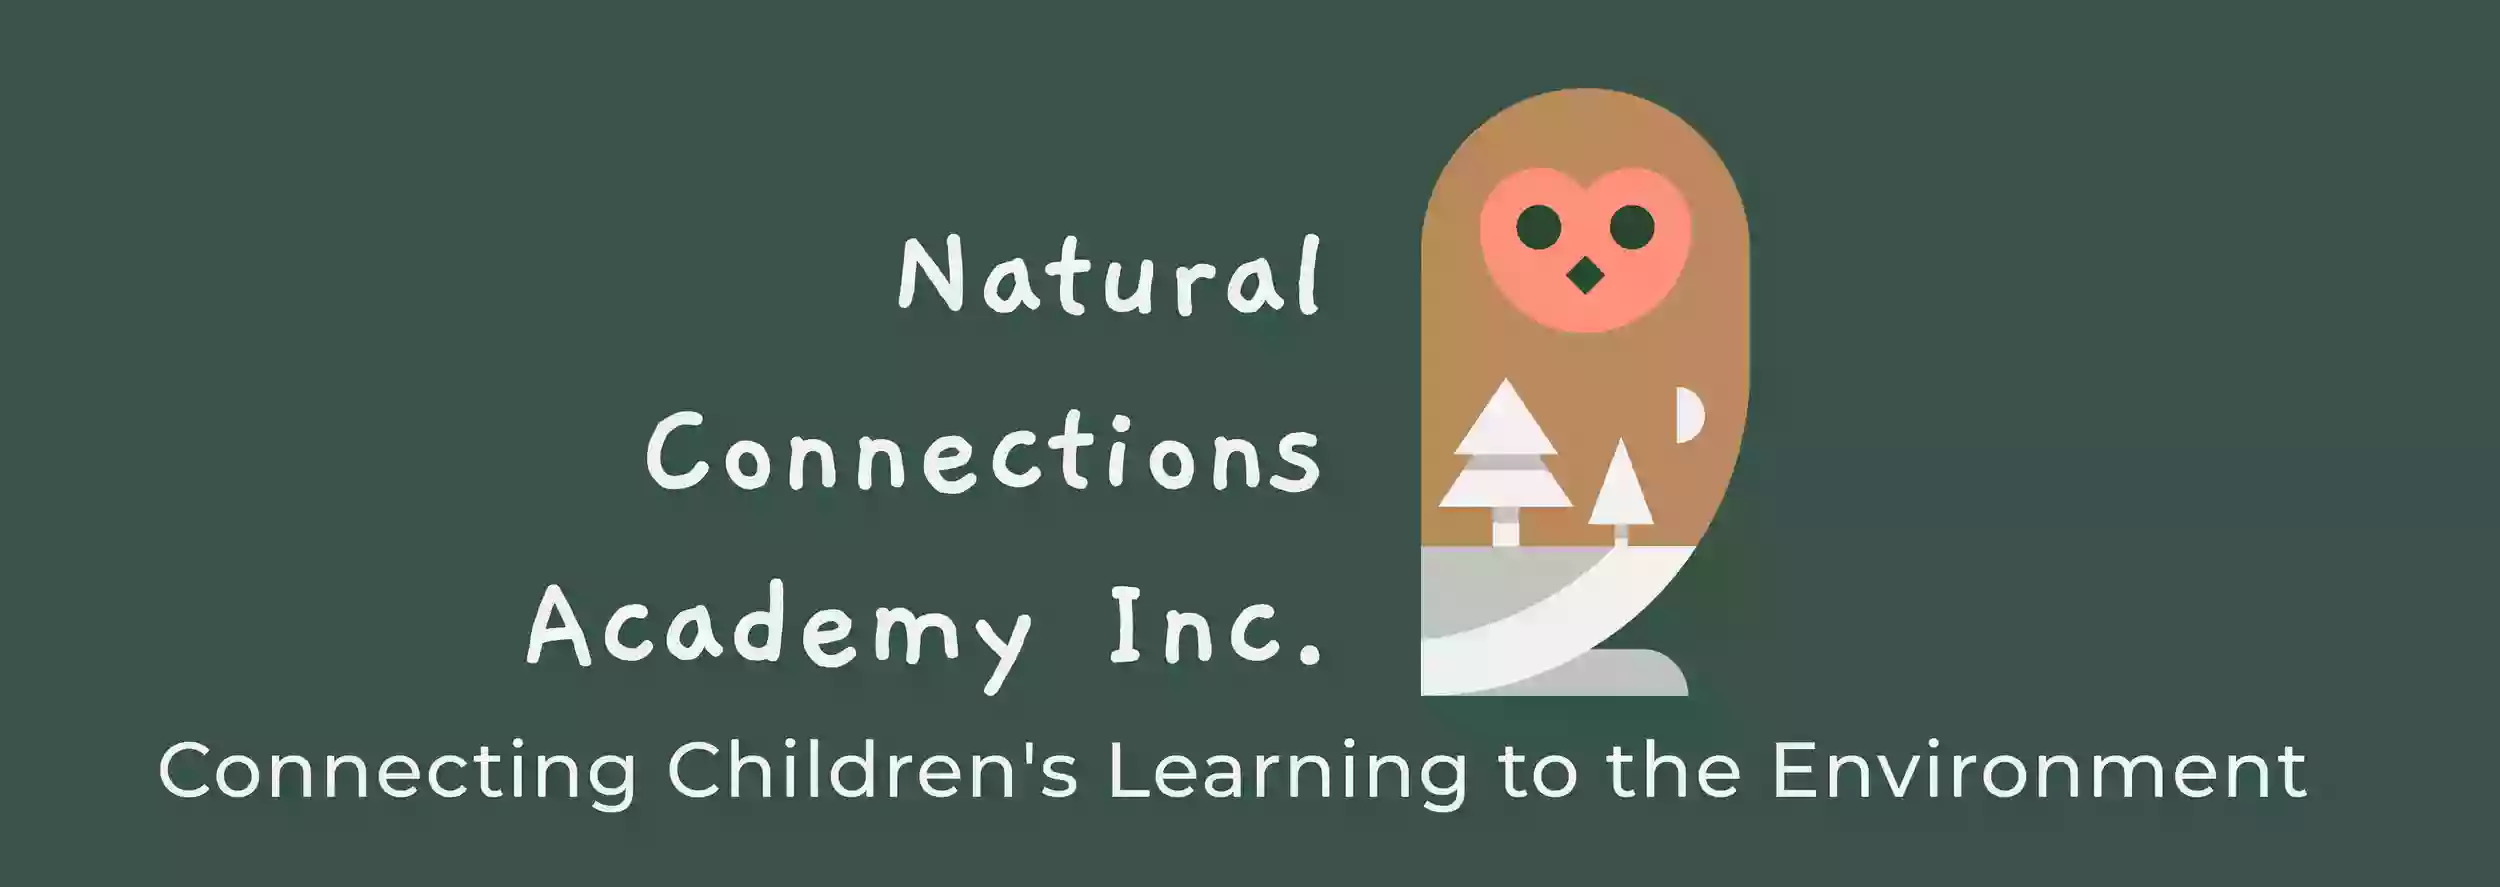 Natural Connections Academy